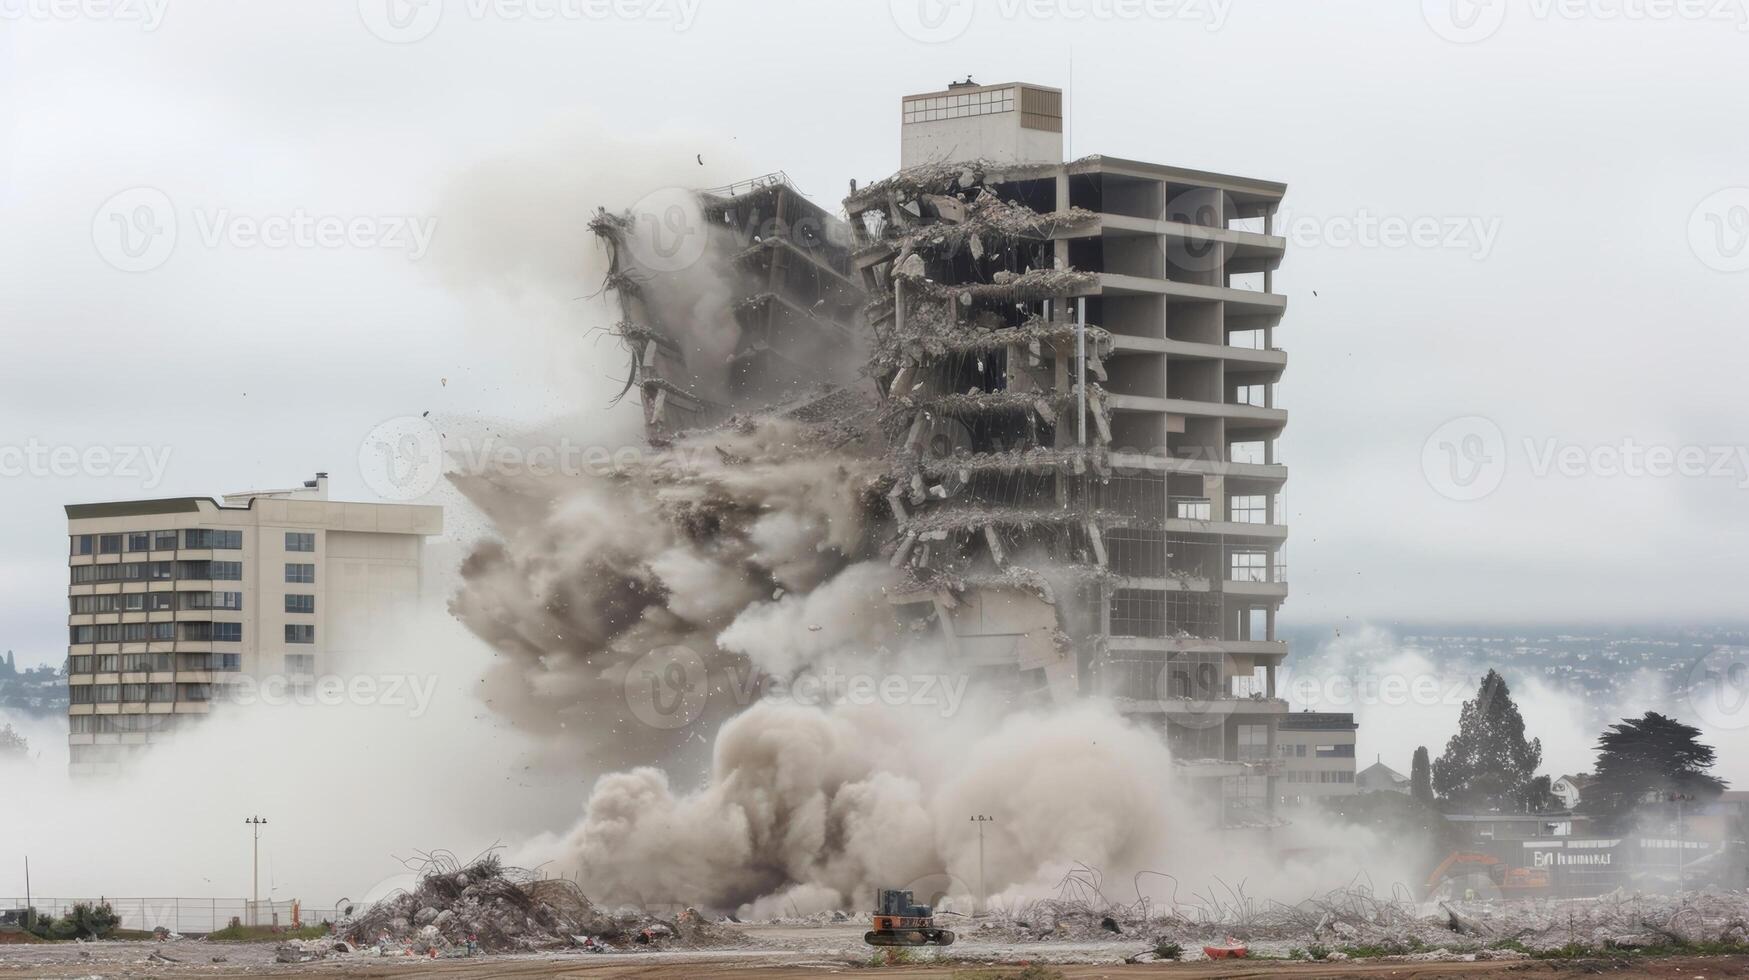 In a dramatic shot the buildings facade collapses in a cloud of dust marking a major milestone in the demolition process photo